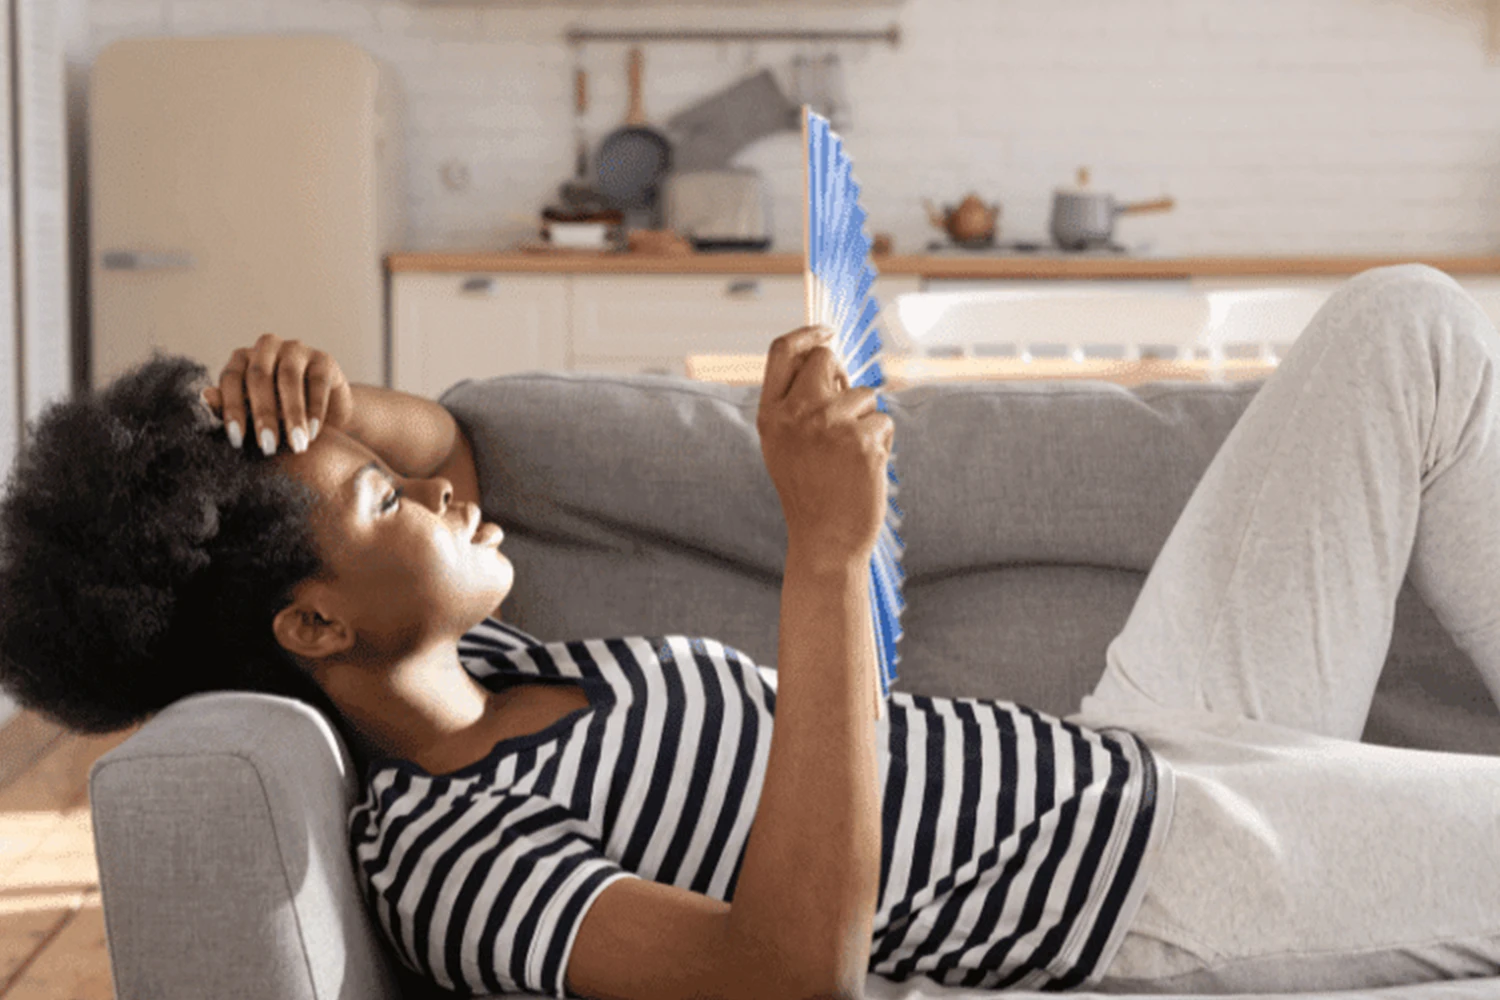 Image of a person feeling hot and cooling off with a blue fan in a well-lit kitchen, illustrating tips on how to stay cool when the AC is broken.